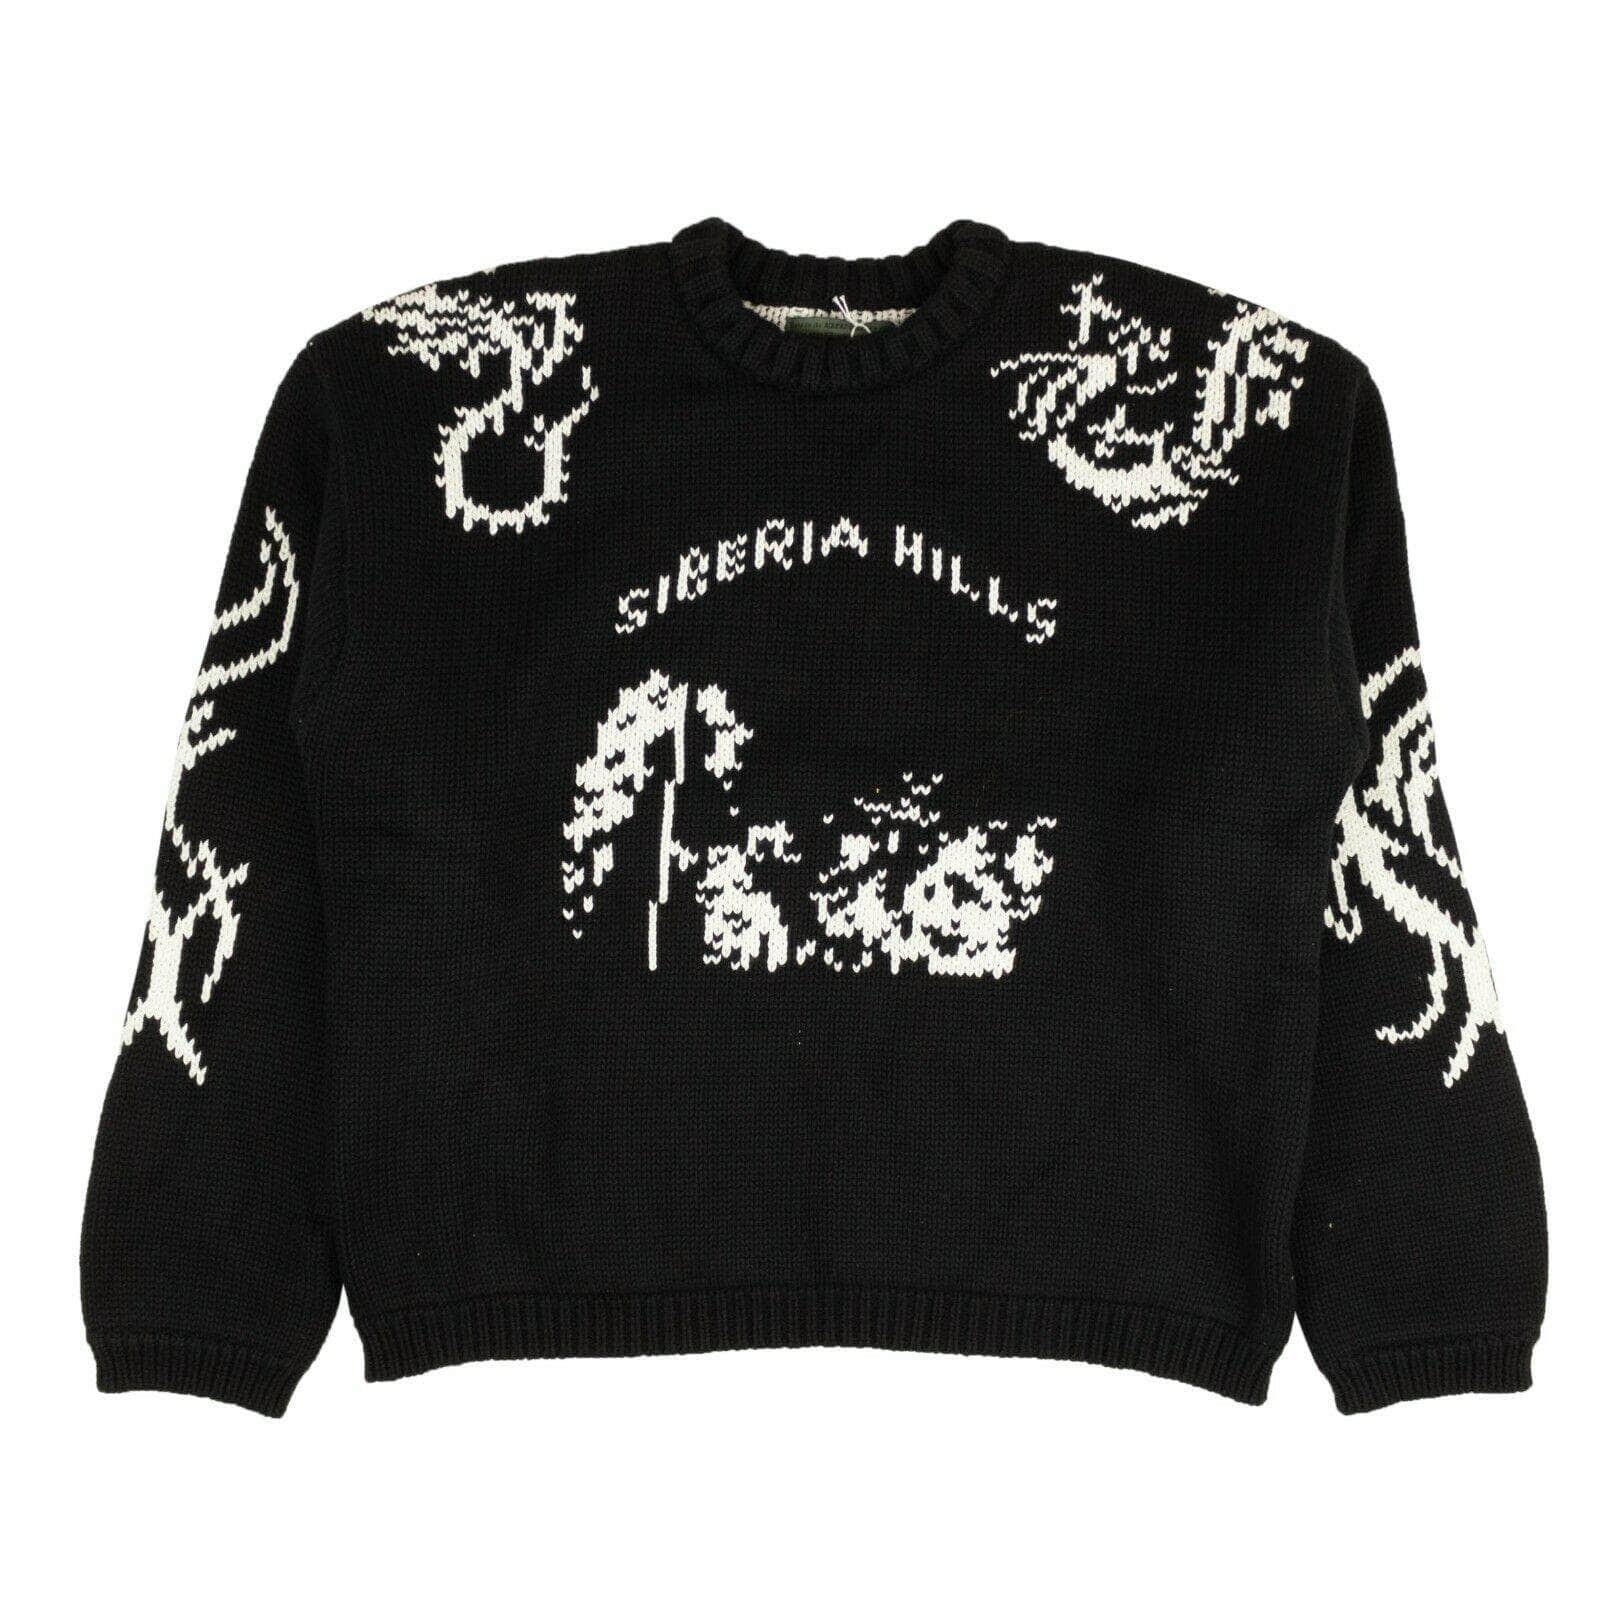 Siberia Hills 500-750, channelenable-all, chicmi, couponcollection, gender-mens, main-clothing, mens-pullover-sweaters, mens-shoes, size-l, size-m, size-xl Black Heavy Tribal Knit Sweater